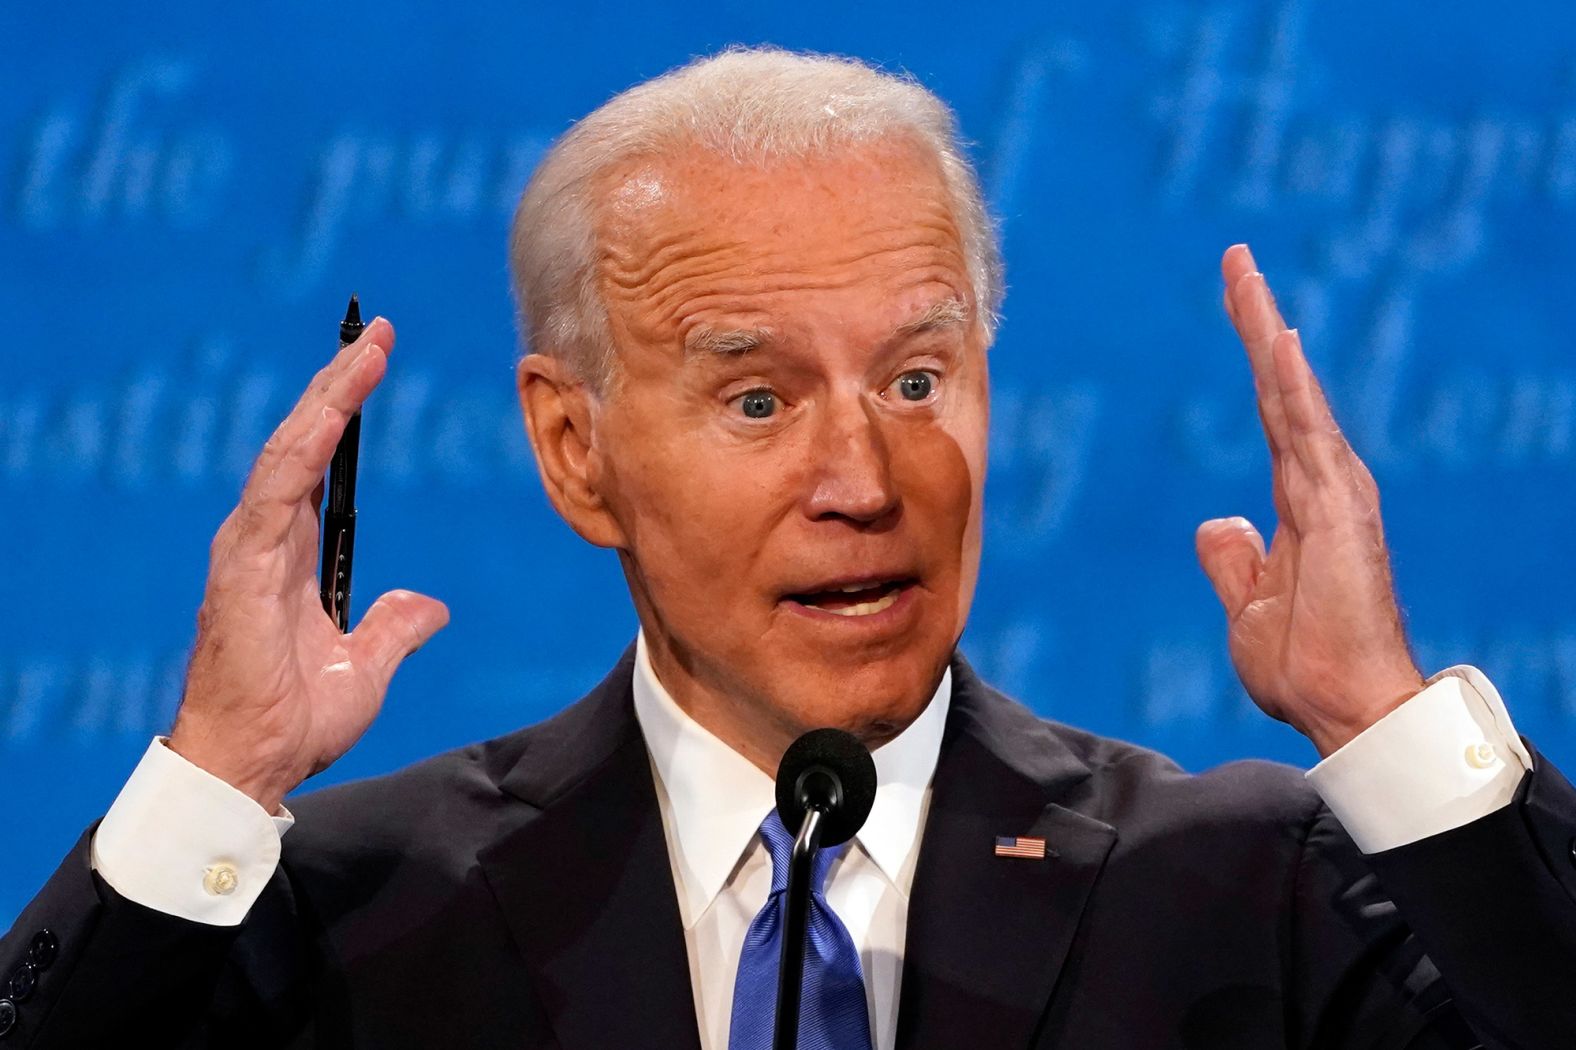 Biden answers a question during the debate. Biden currently has a larger lead in national polls than Hillary Clinton did at this point in 2016. <a href="https://www.cnn.com/election/2020/presidential-polls" target="_blank">In CNN's Poll of Polls,</a> Biden is leading Trump by 10 points nationally and he is also showing considerable strength in the key battleground states of Pennsylvania, Michigan and Wisconsin where Trump won by narrow margins in 2016.